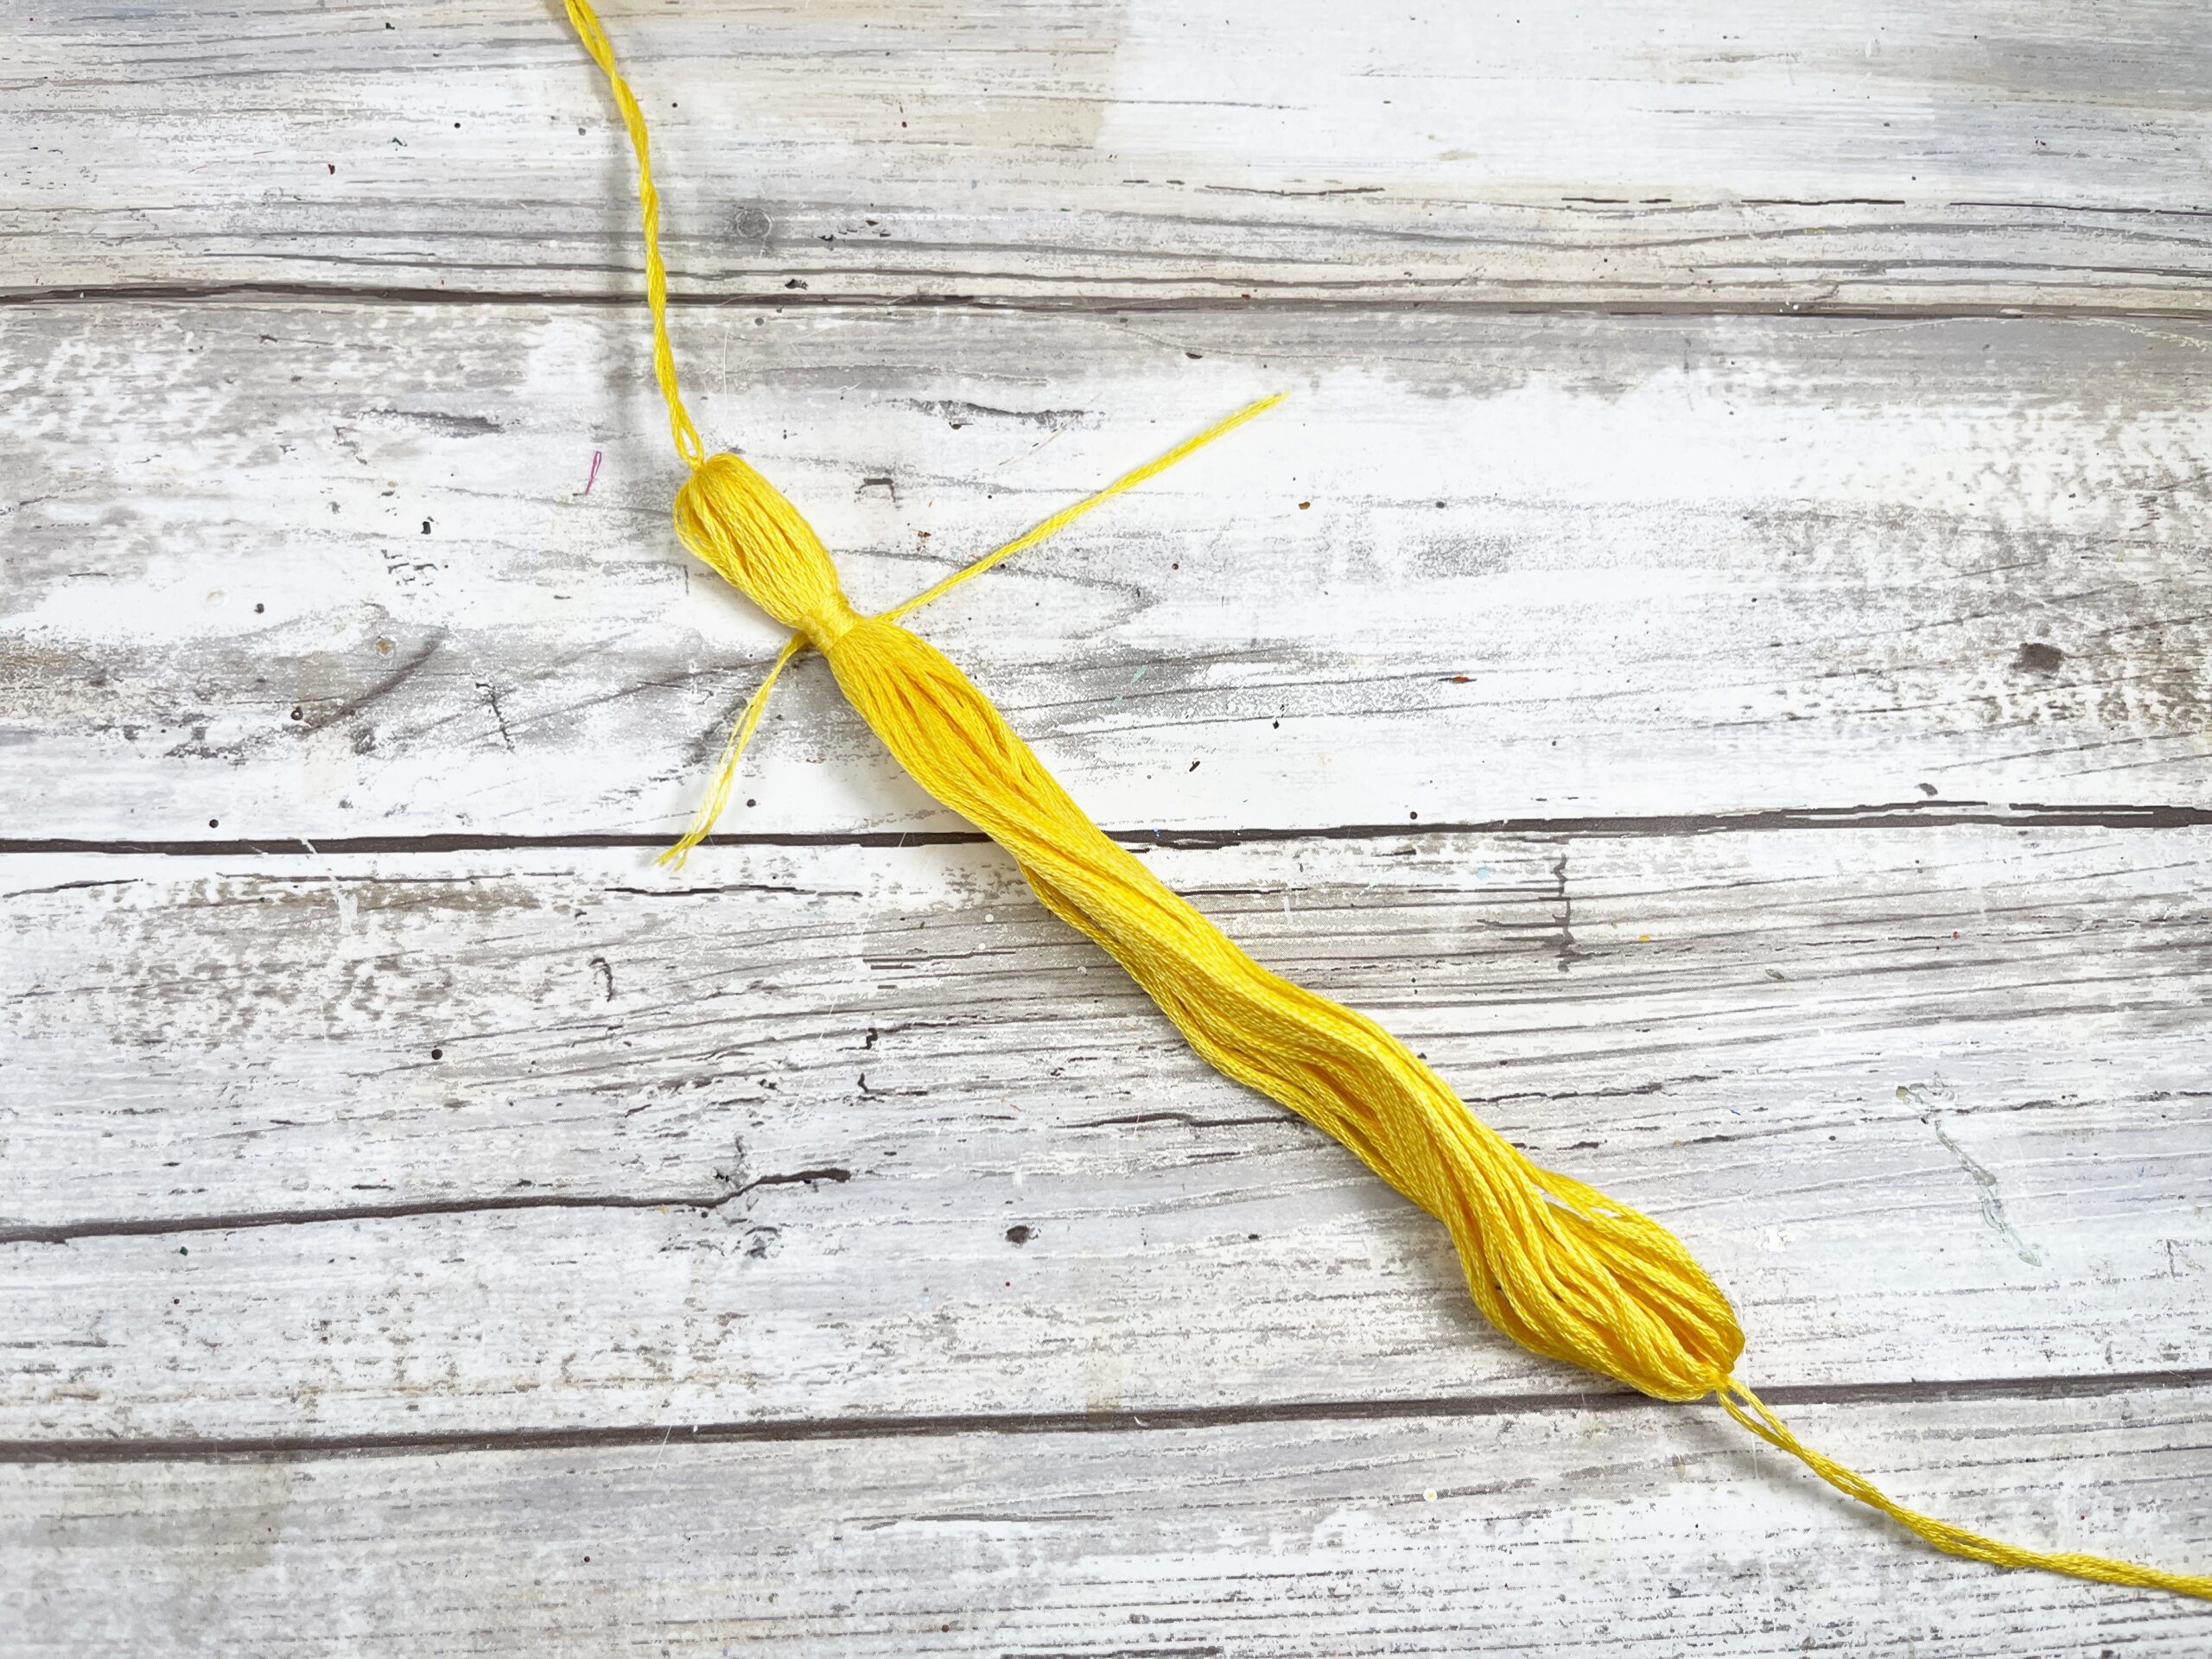 How to make a tassel with embroidery floss.